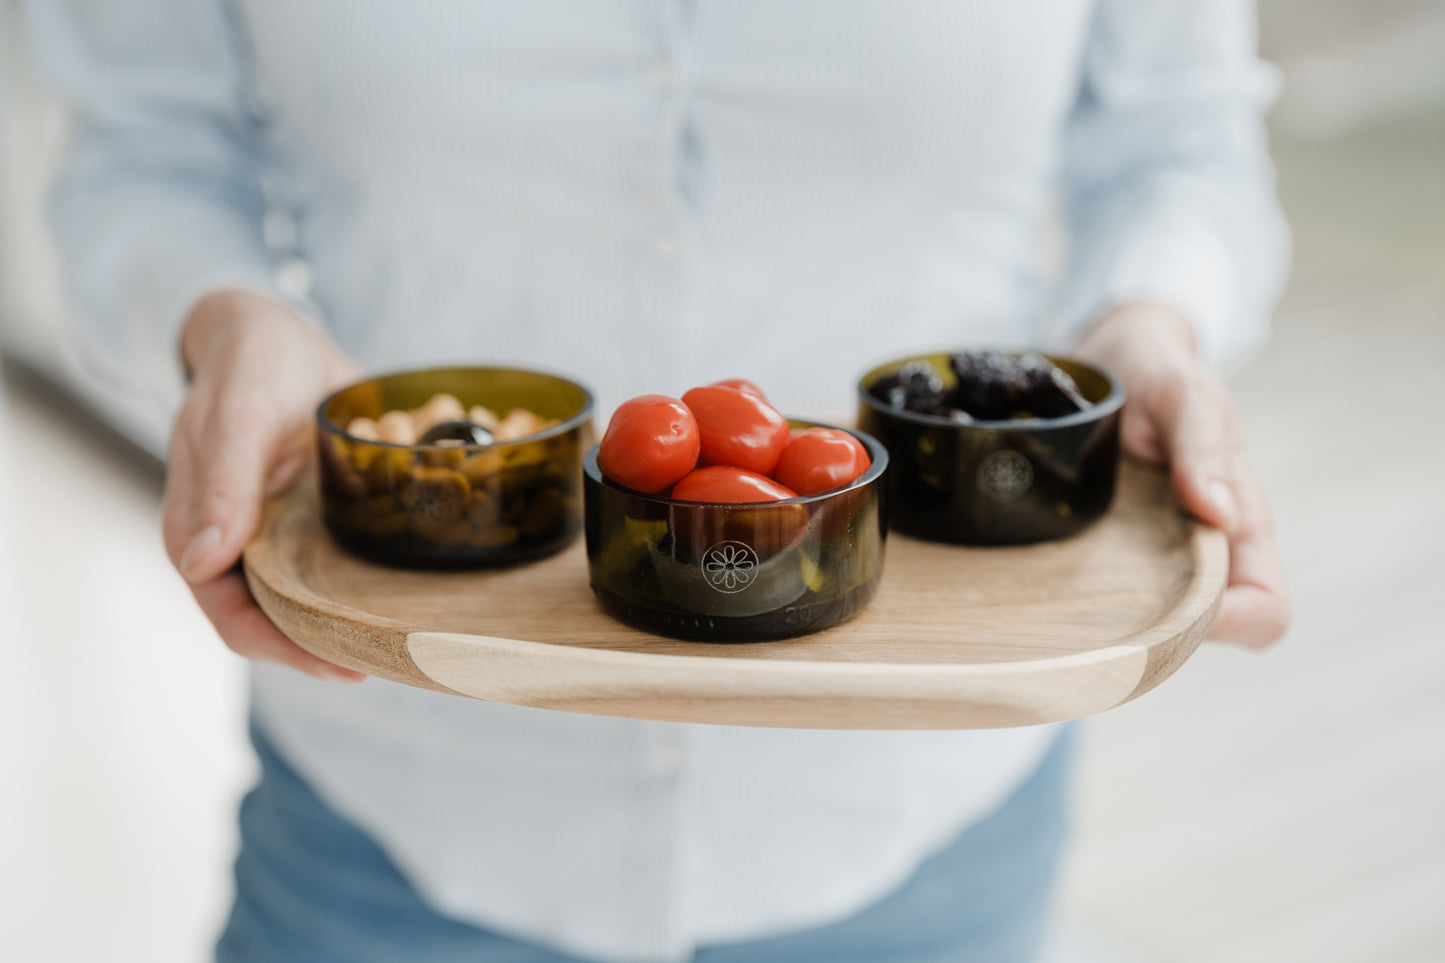 Egg cups or small aperitif bowls